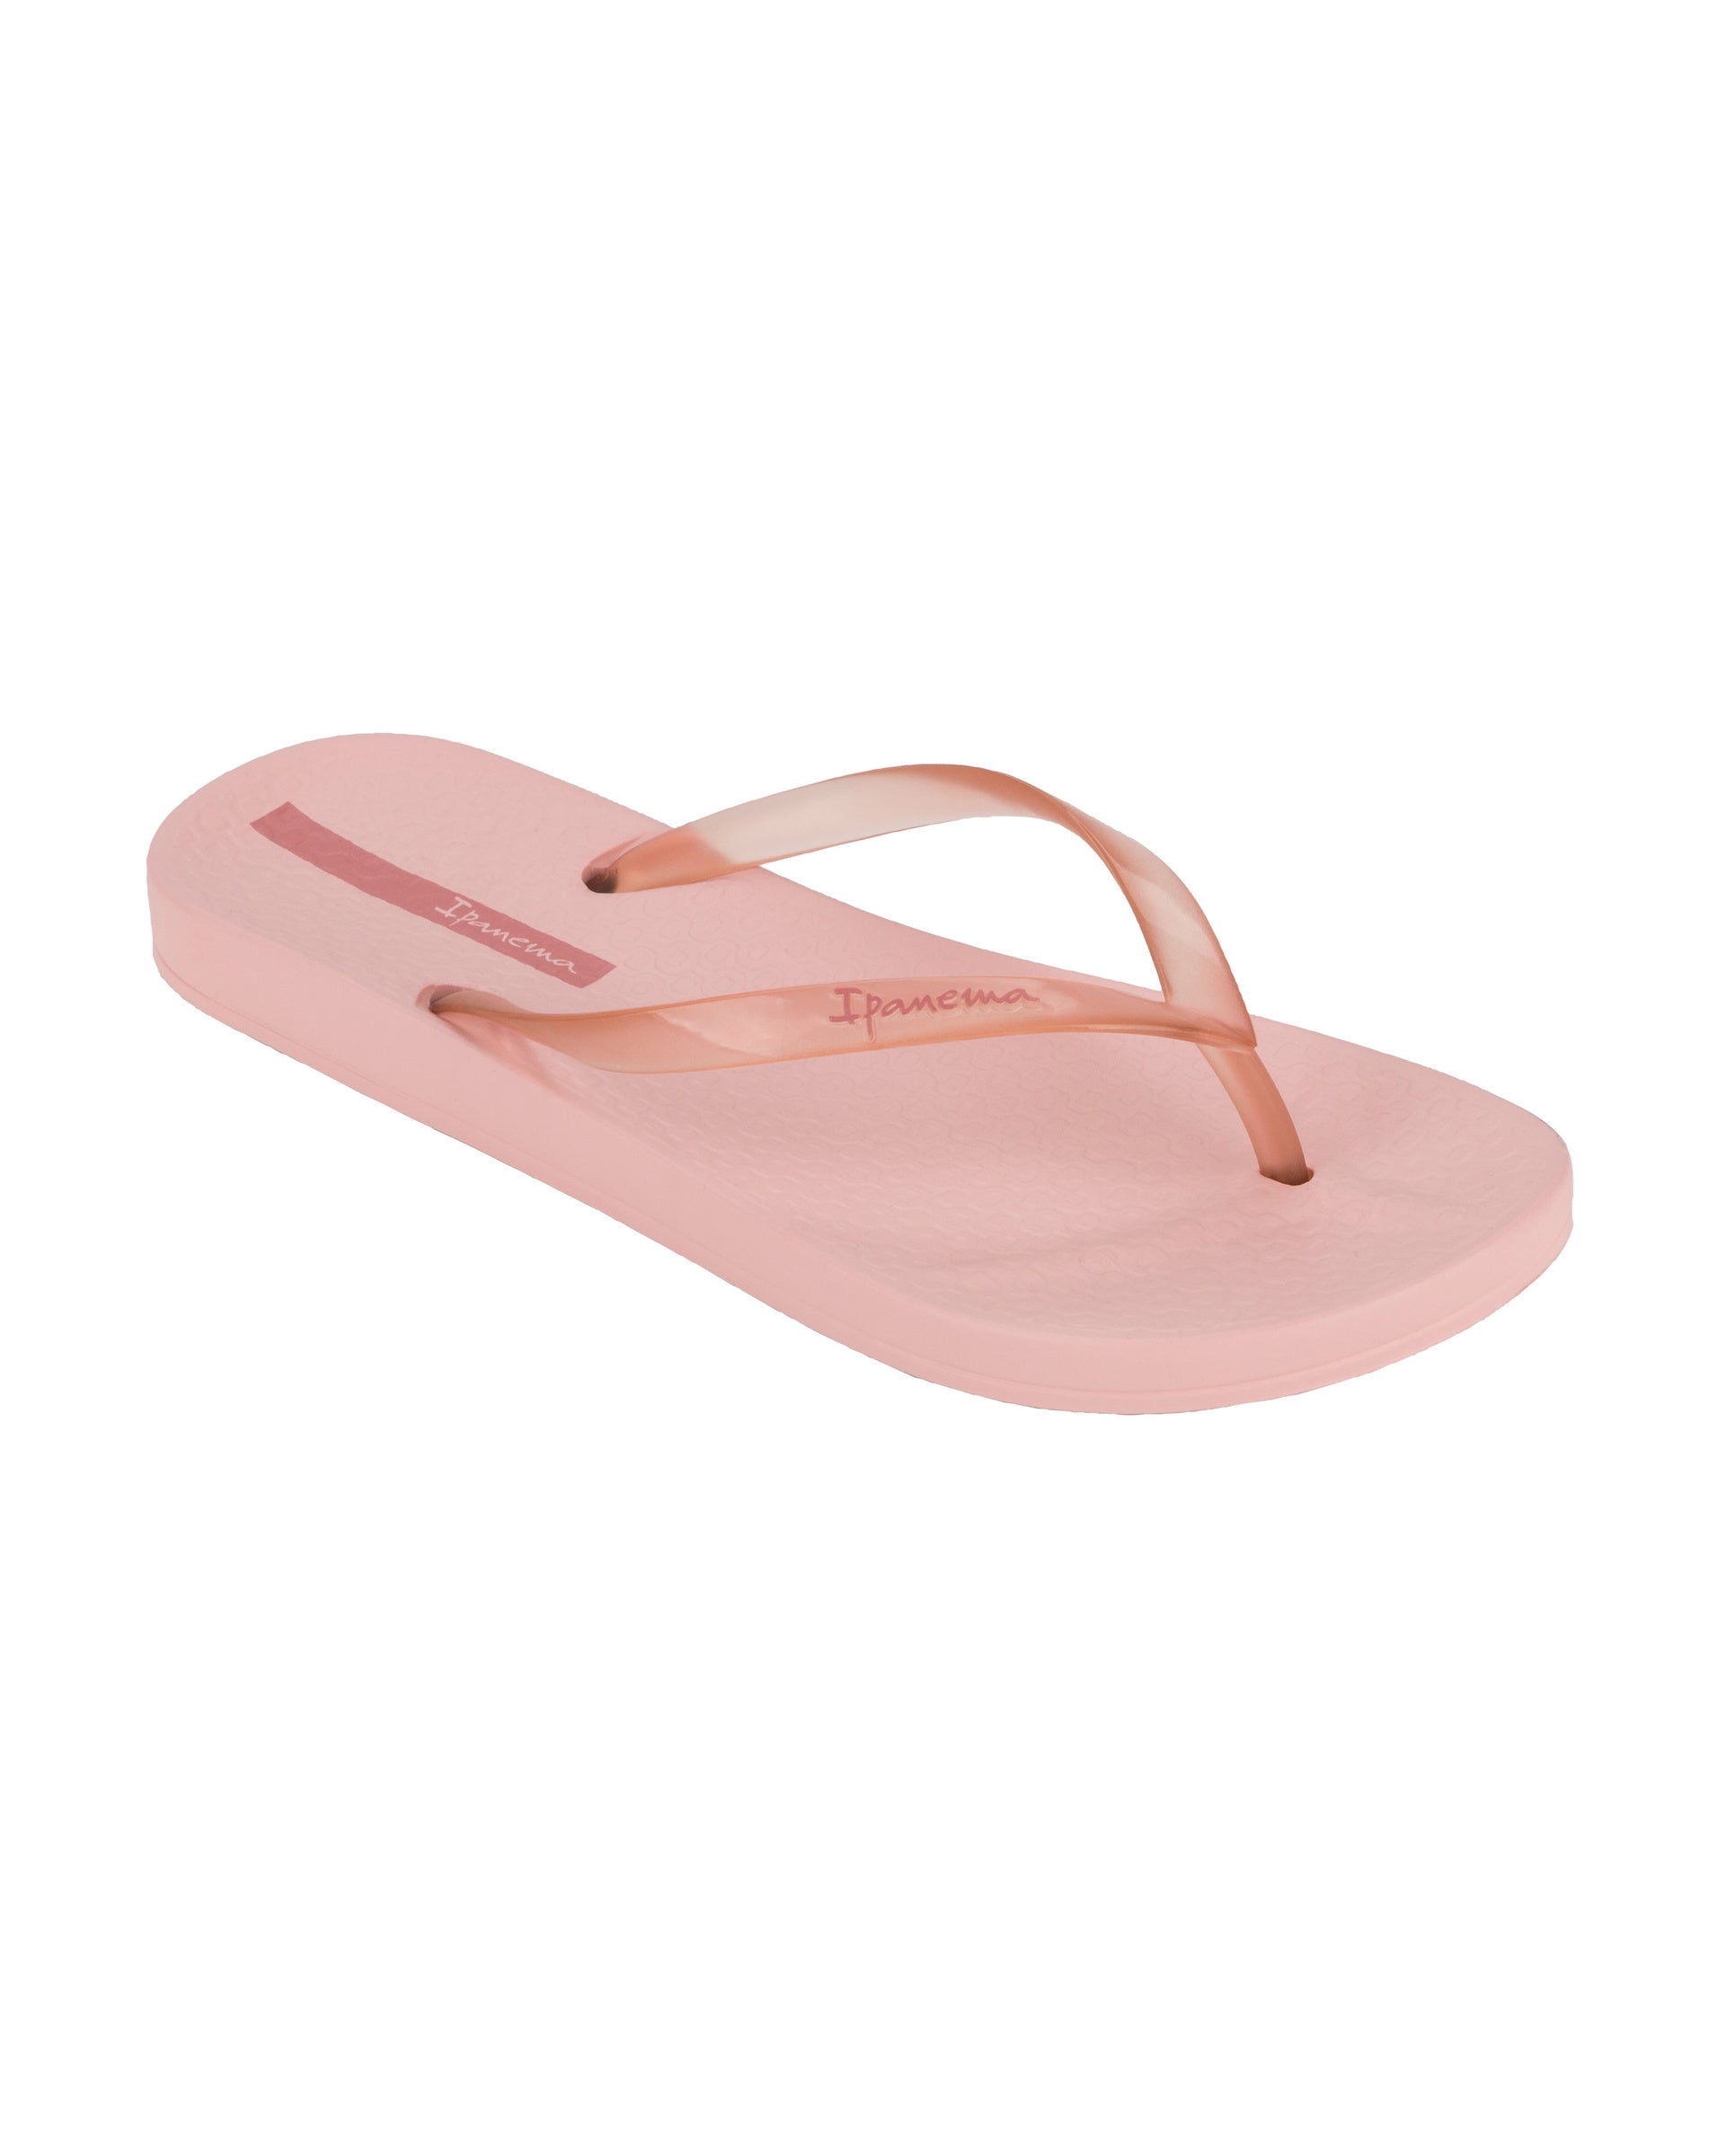 Angled view of a pink Ipanema Ana Connect women's flip flop with a clear pink strap.